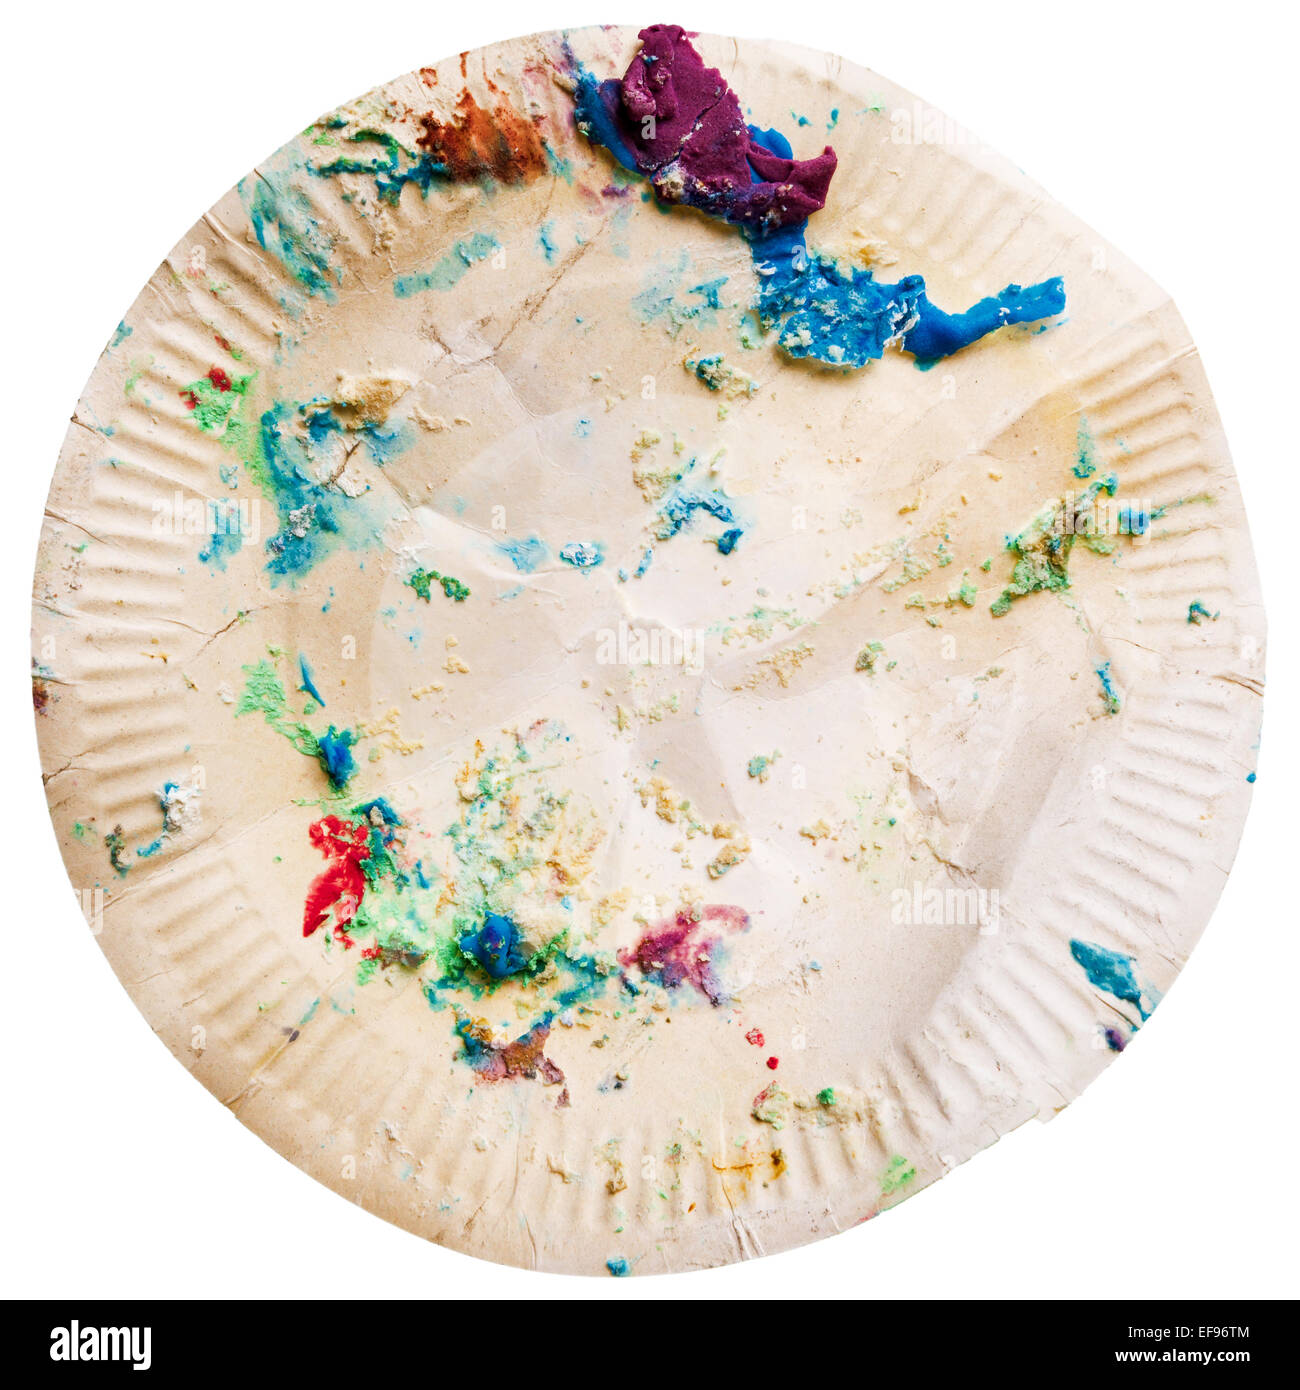 Disposable crumpled paper plate with cake crumbs isolated on white background. End of birthday party concept. Stock Photo